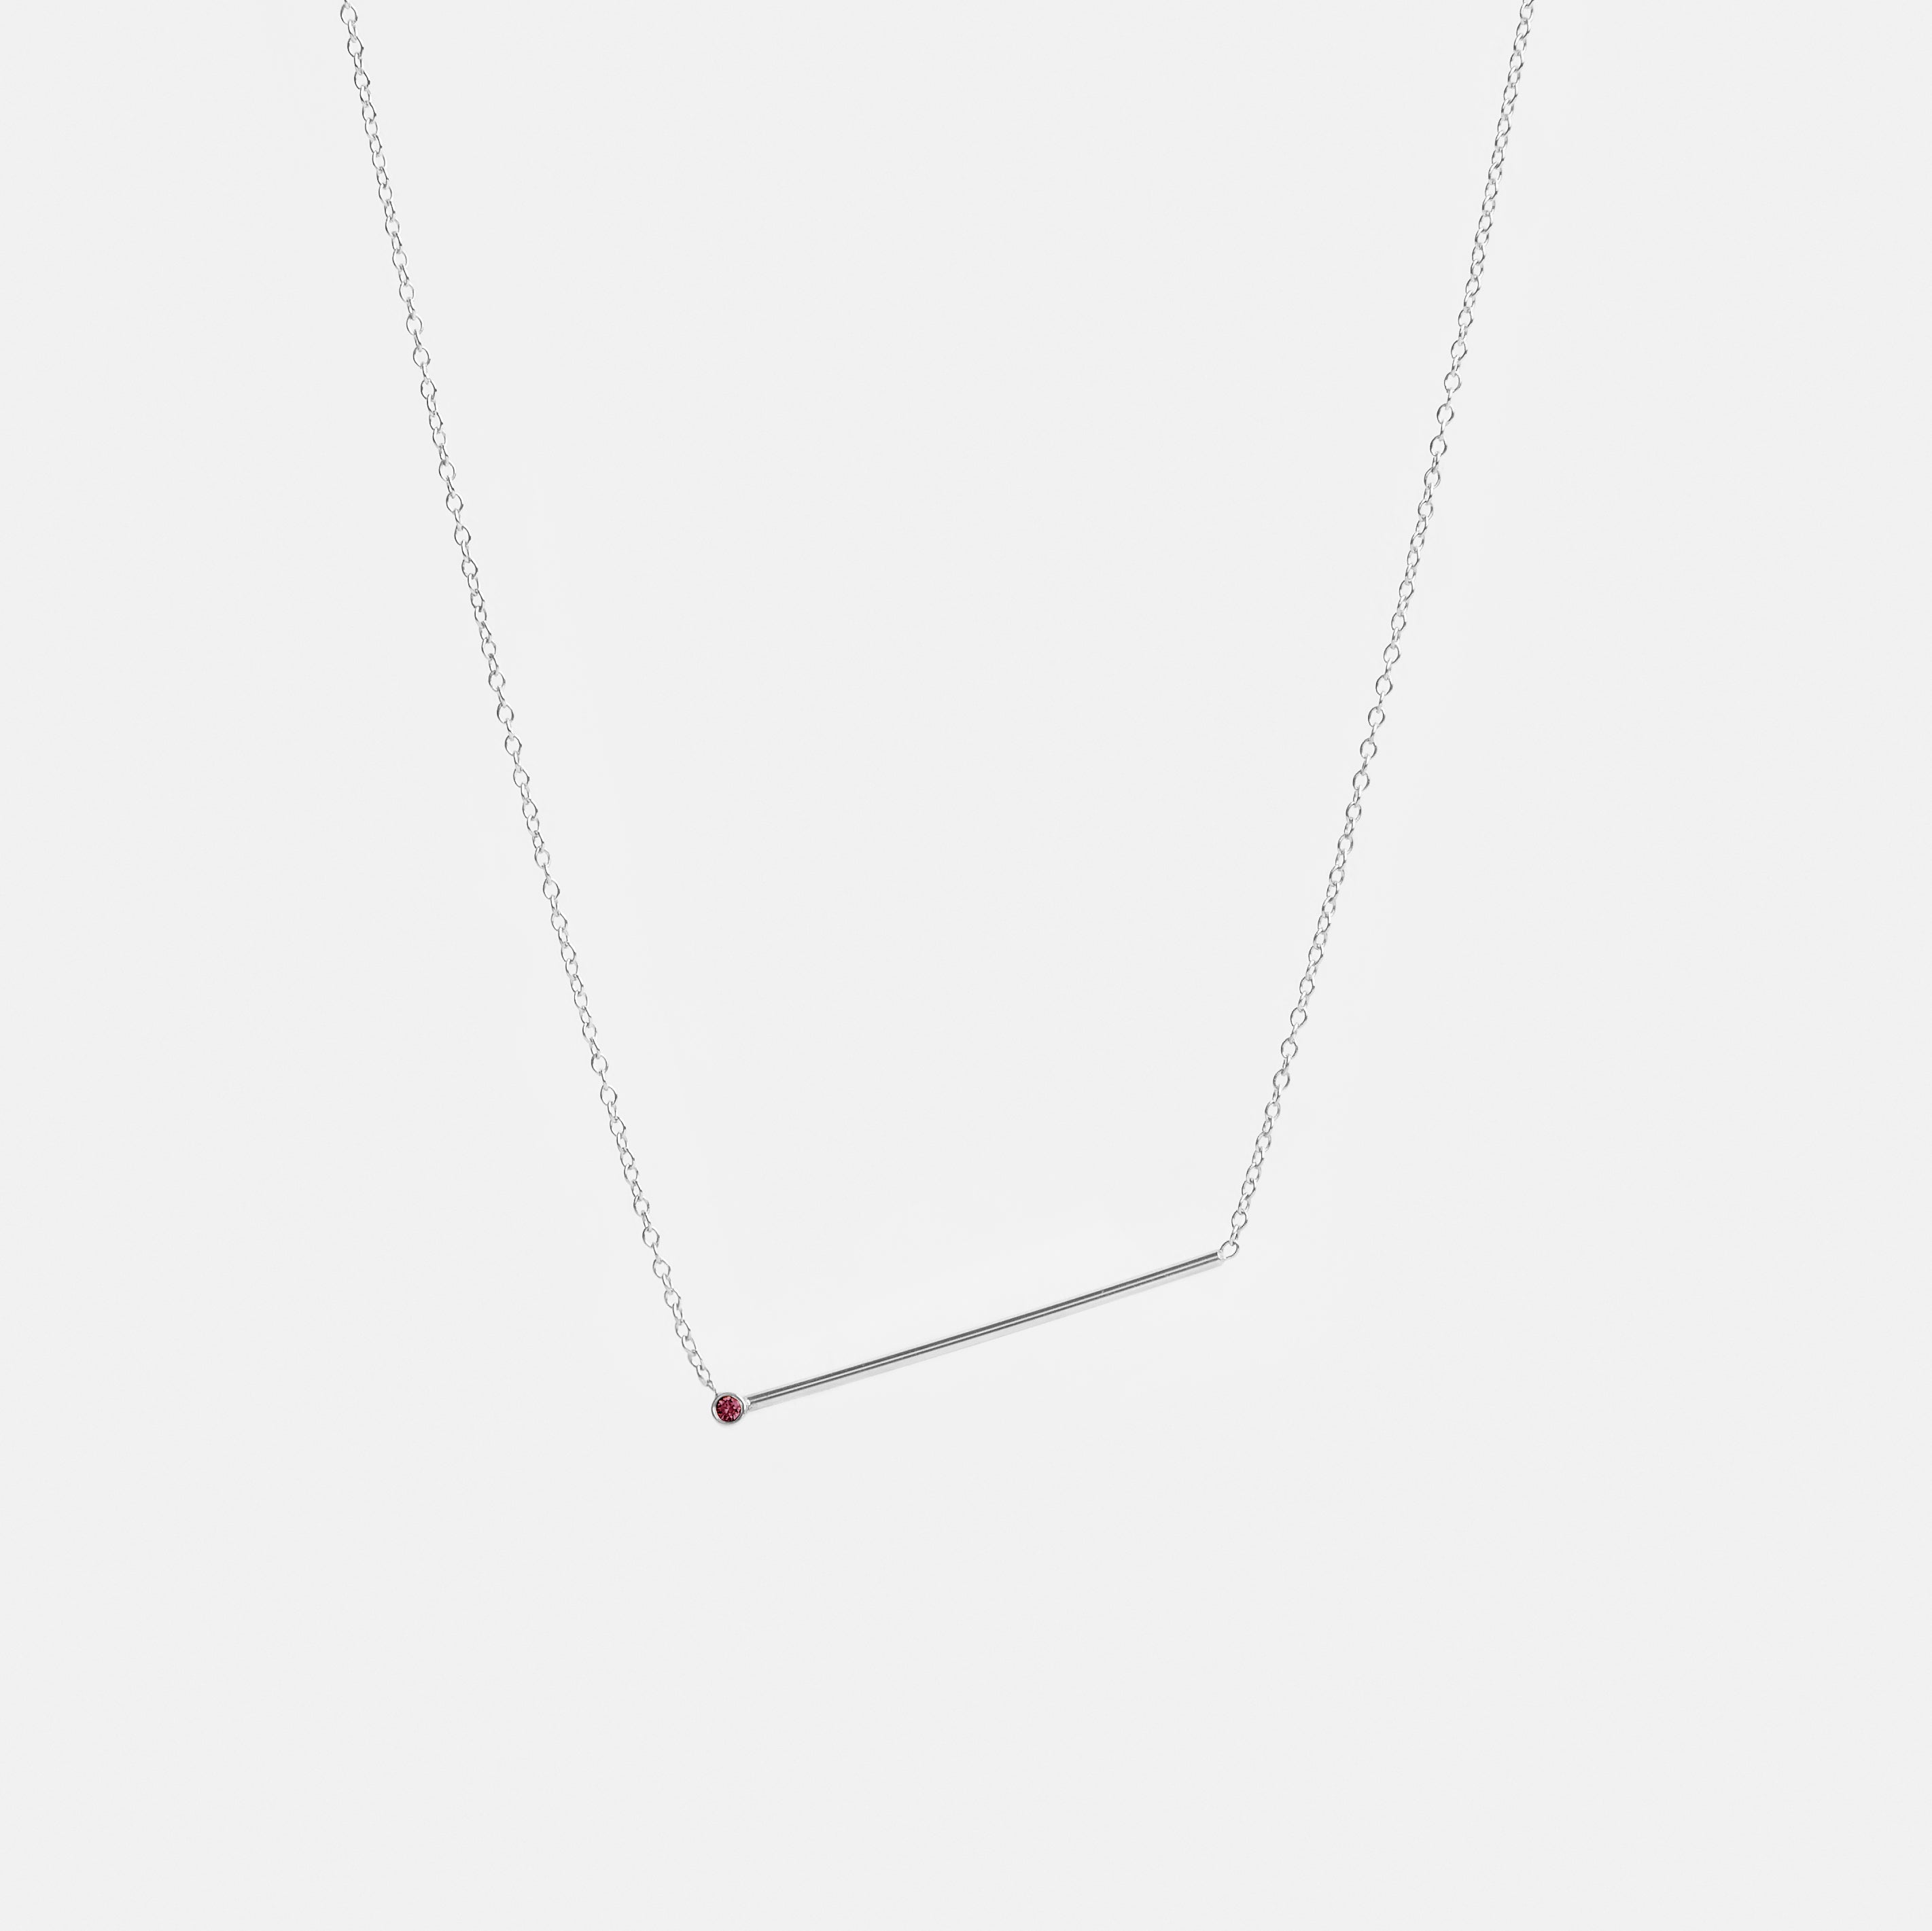 Enne Unusual Necklace in Sterling Silver set with Ruby By SHW Fine Jewelry New York City